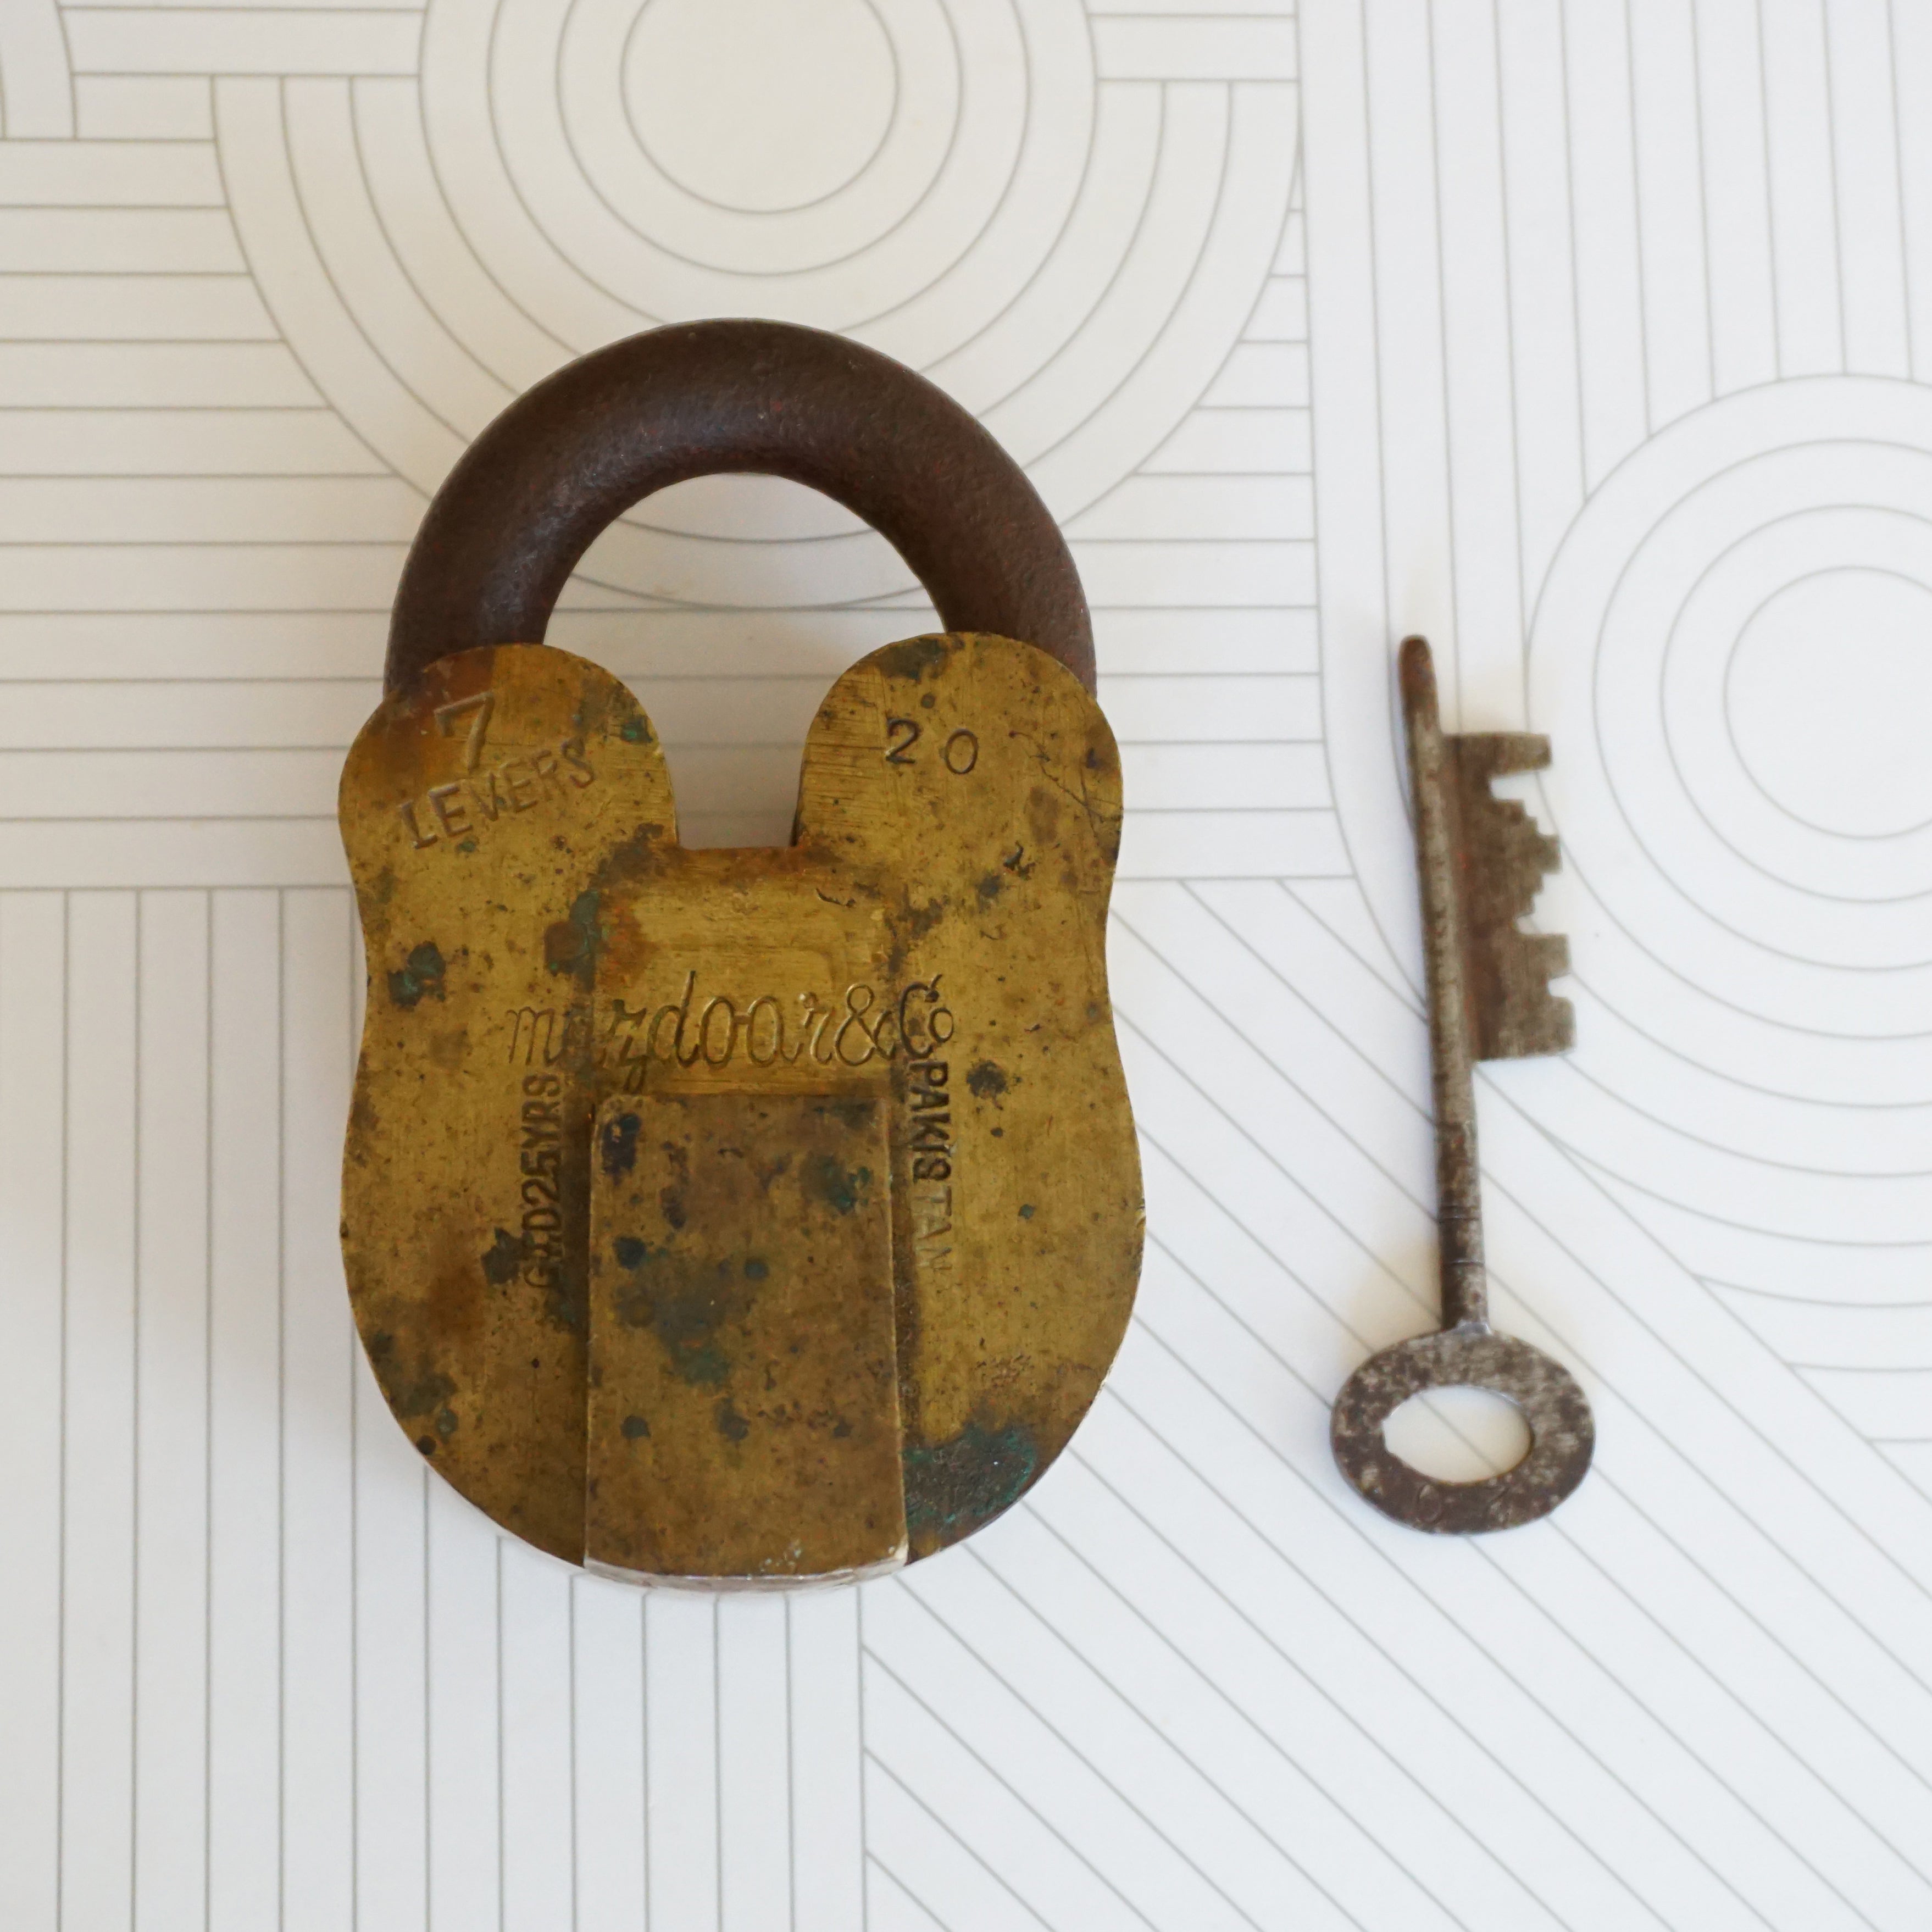 Antique Solid Brass MAZDOAR & CO Lock and Original Key. 7 Levels. G.I.D. 25 Years